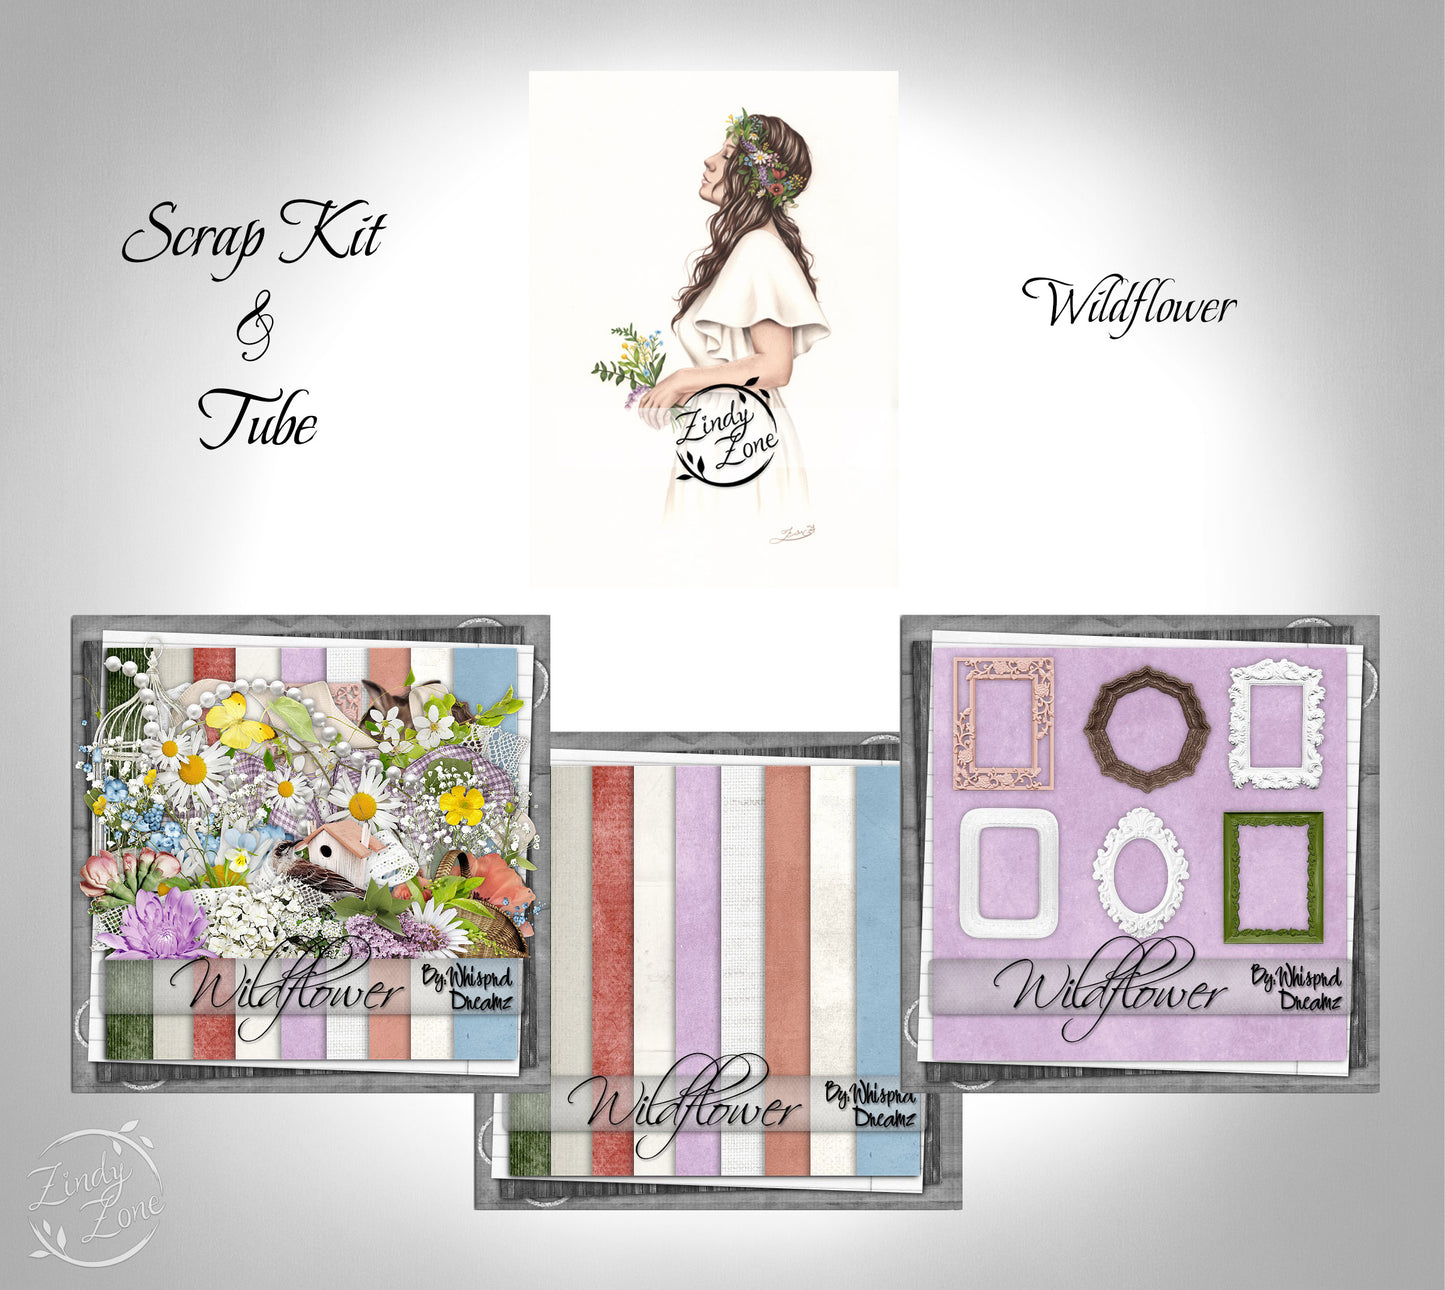 Wildflower - Scrap Kit and Tube Pack